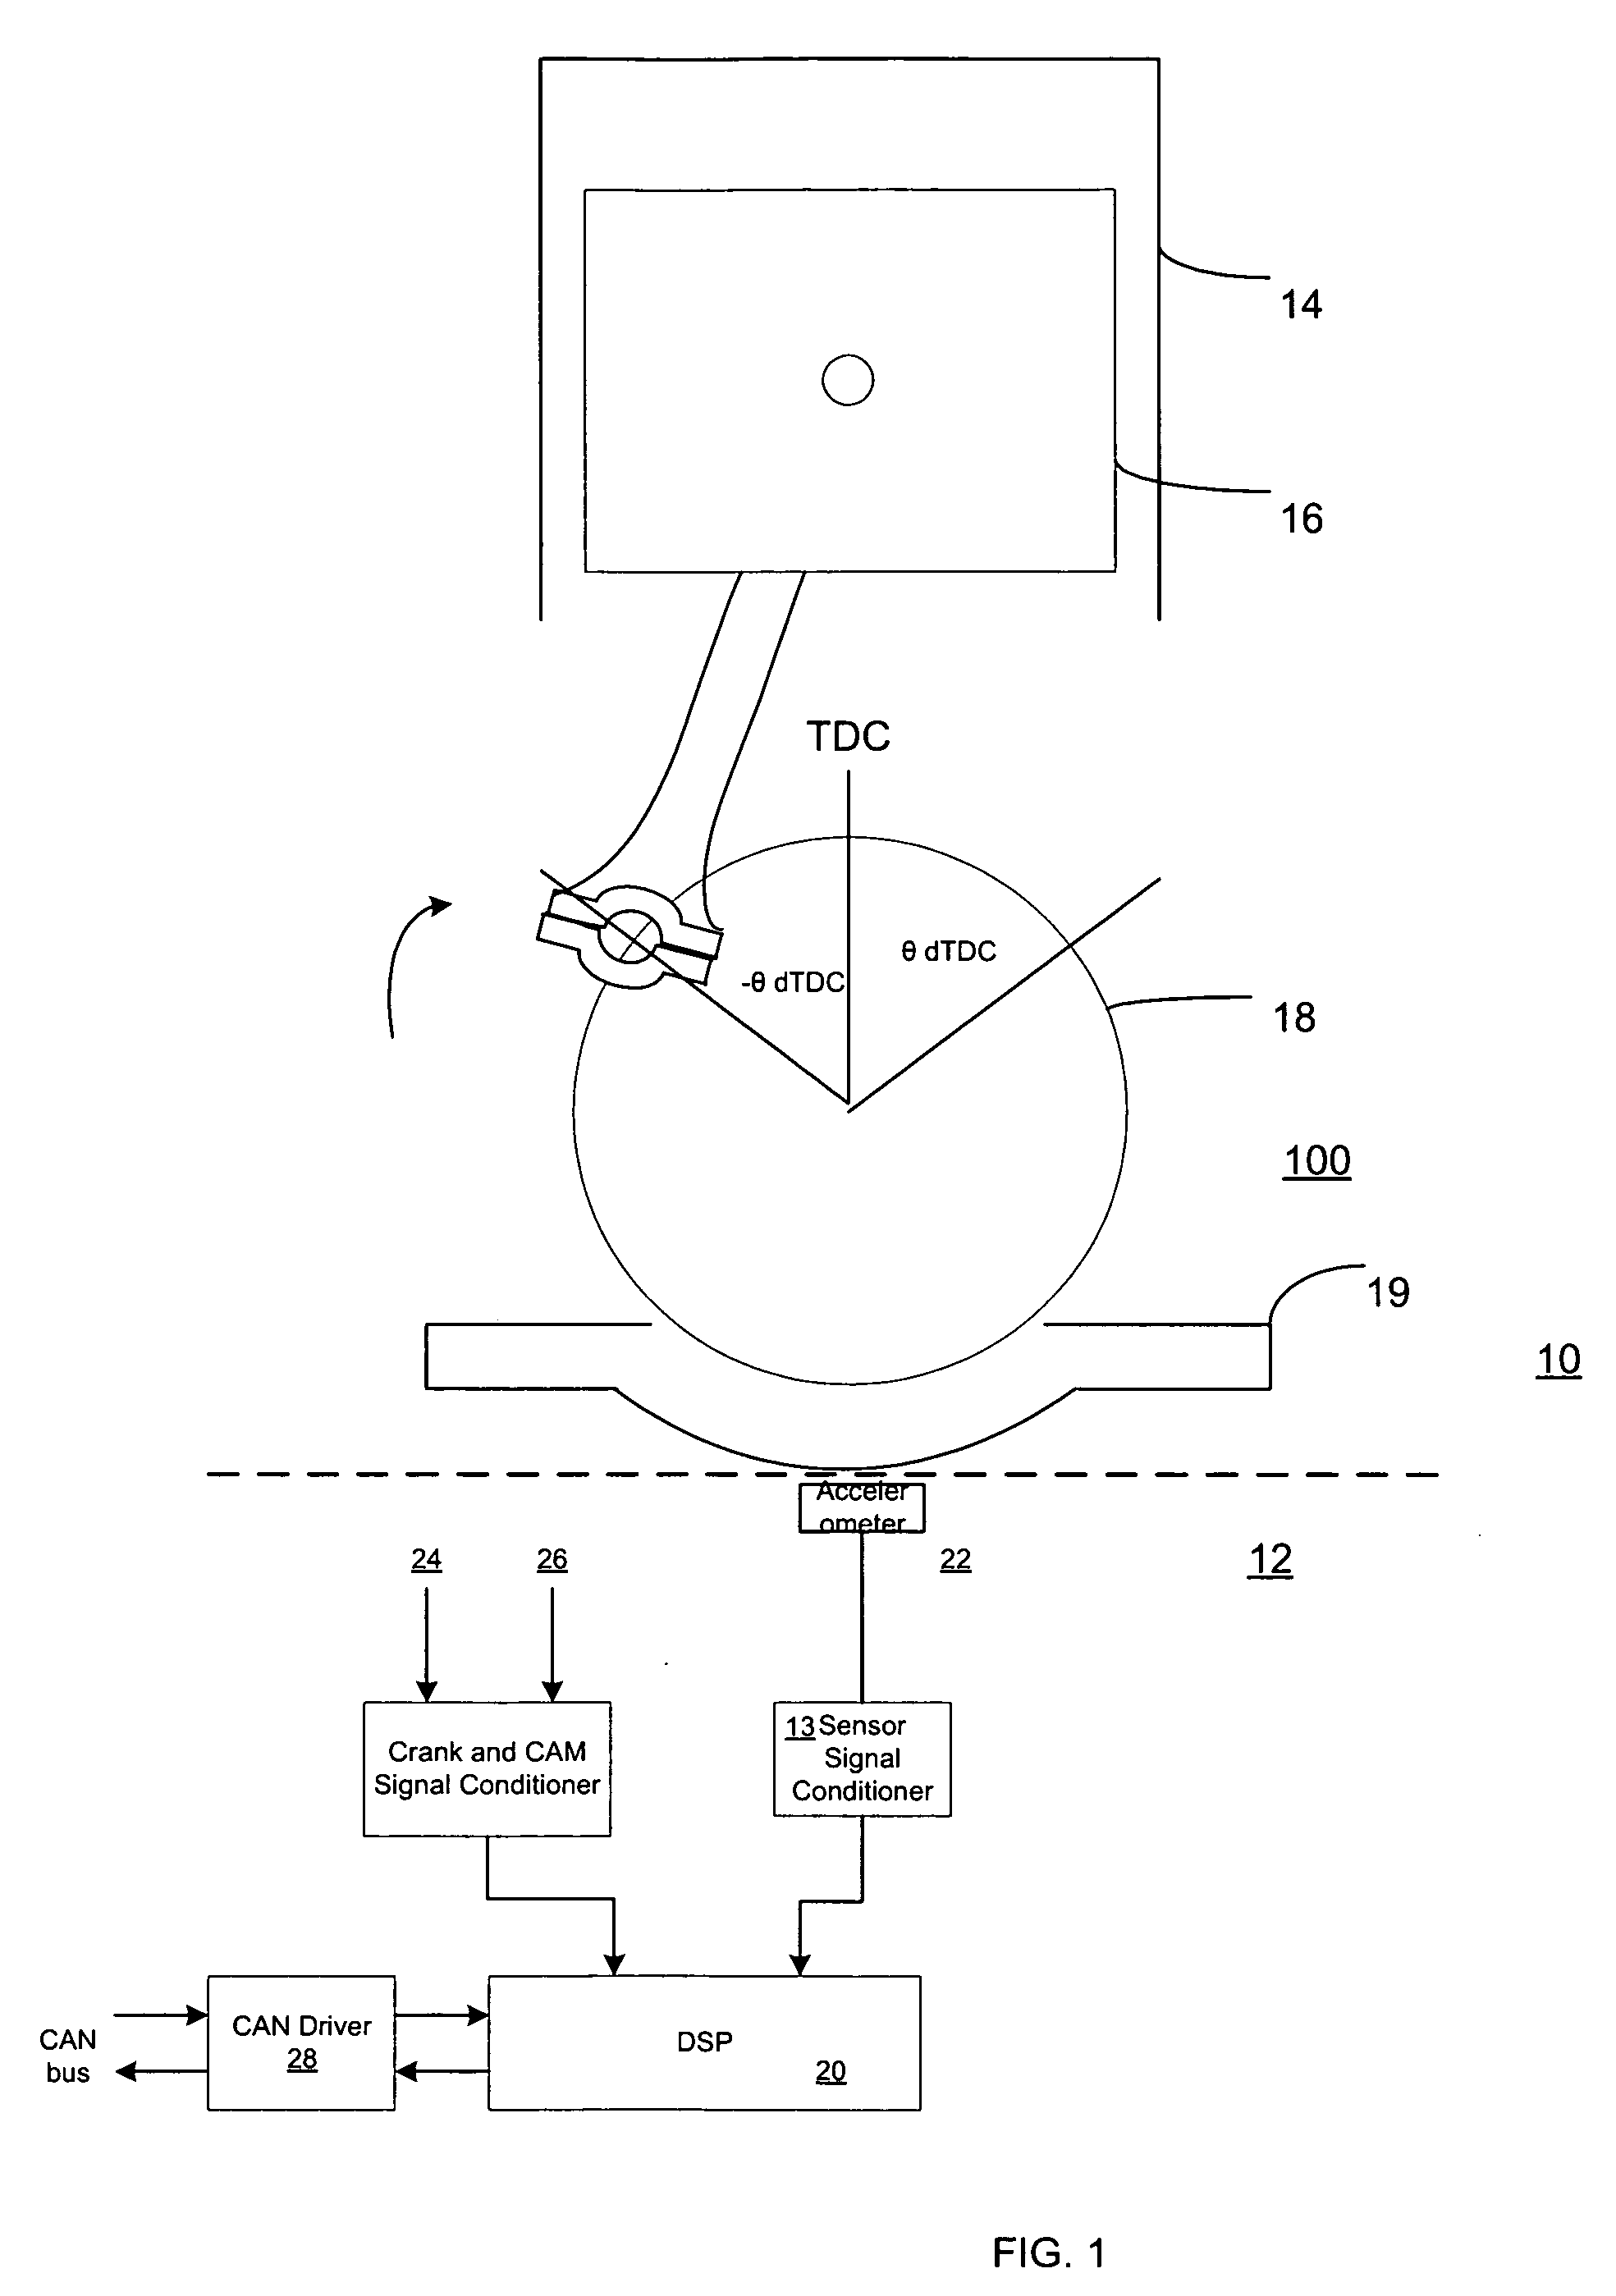 System and method for processing an accelerometer signal to assist in combustion quality control in an internal combustion engine